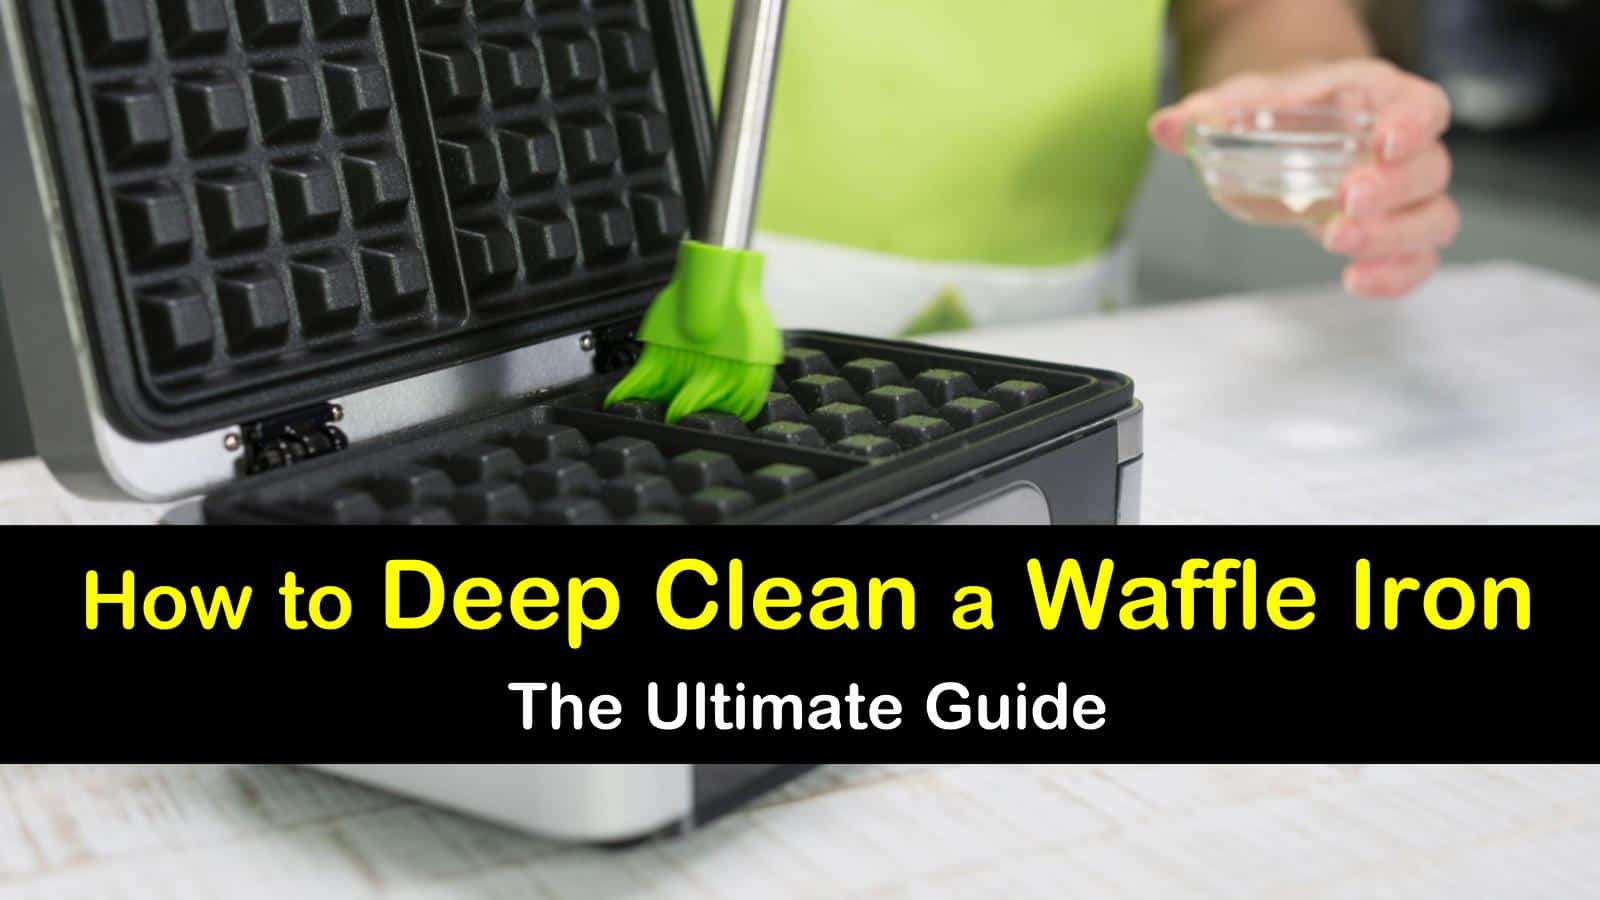 https://www.tipsbulletin.com/wp-content/uploads/2019/09/how-to-clean-a-waffle-iron-t1.jpg